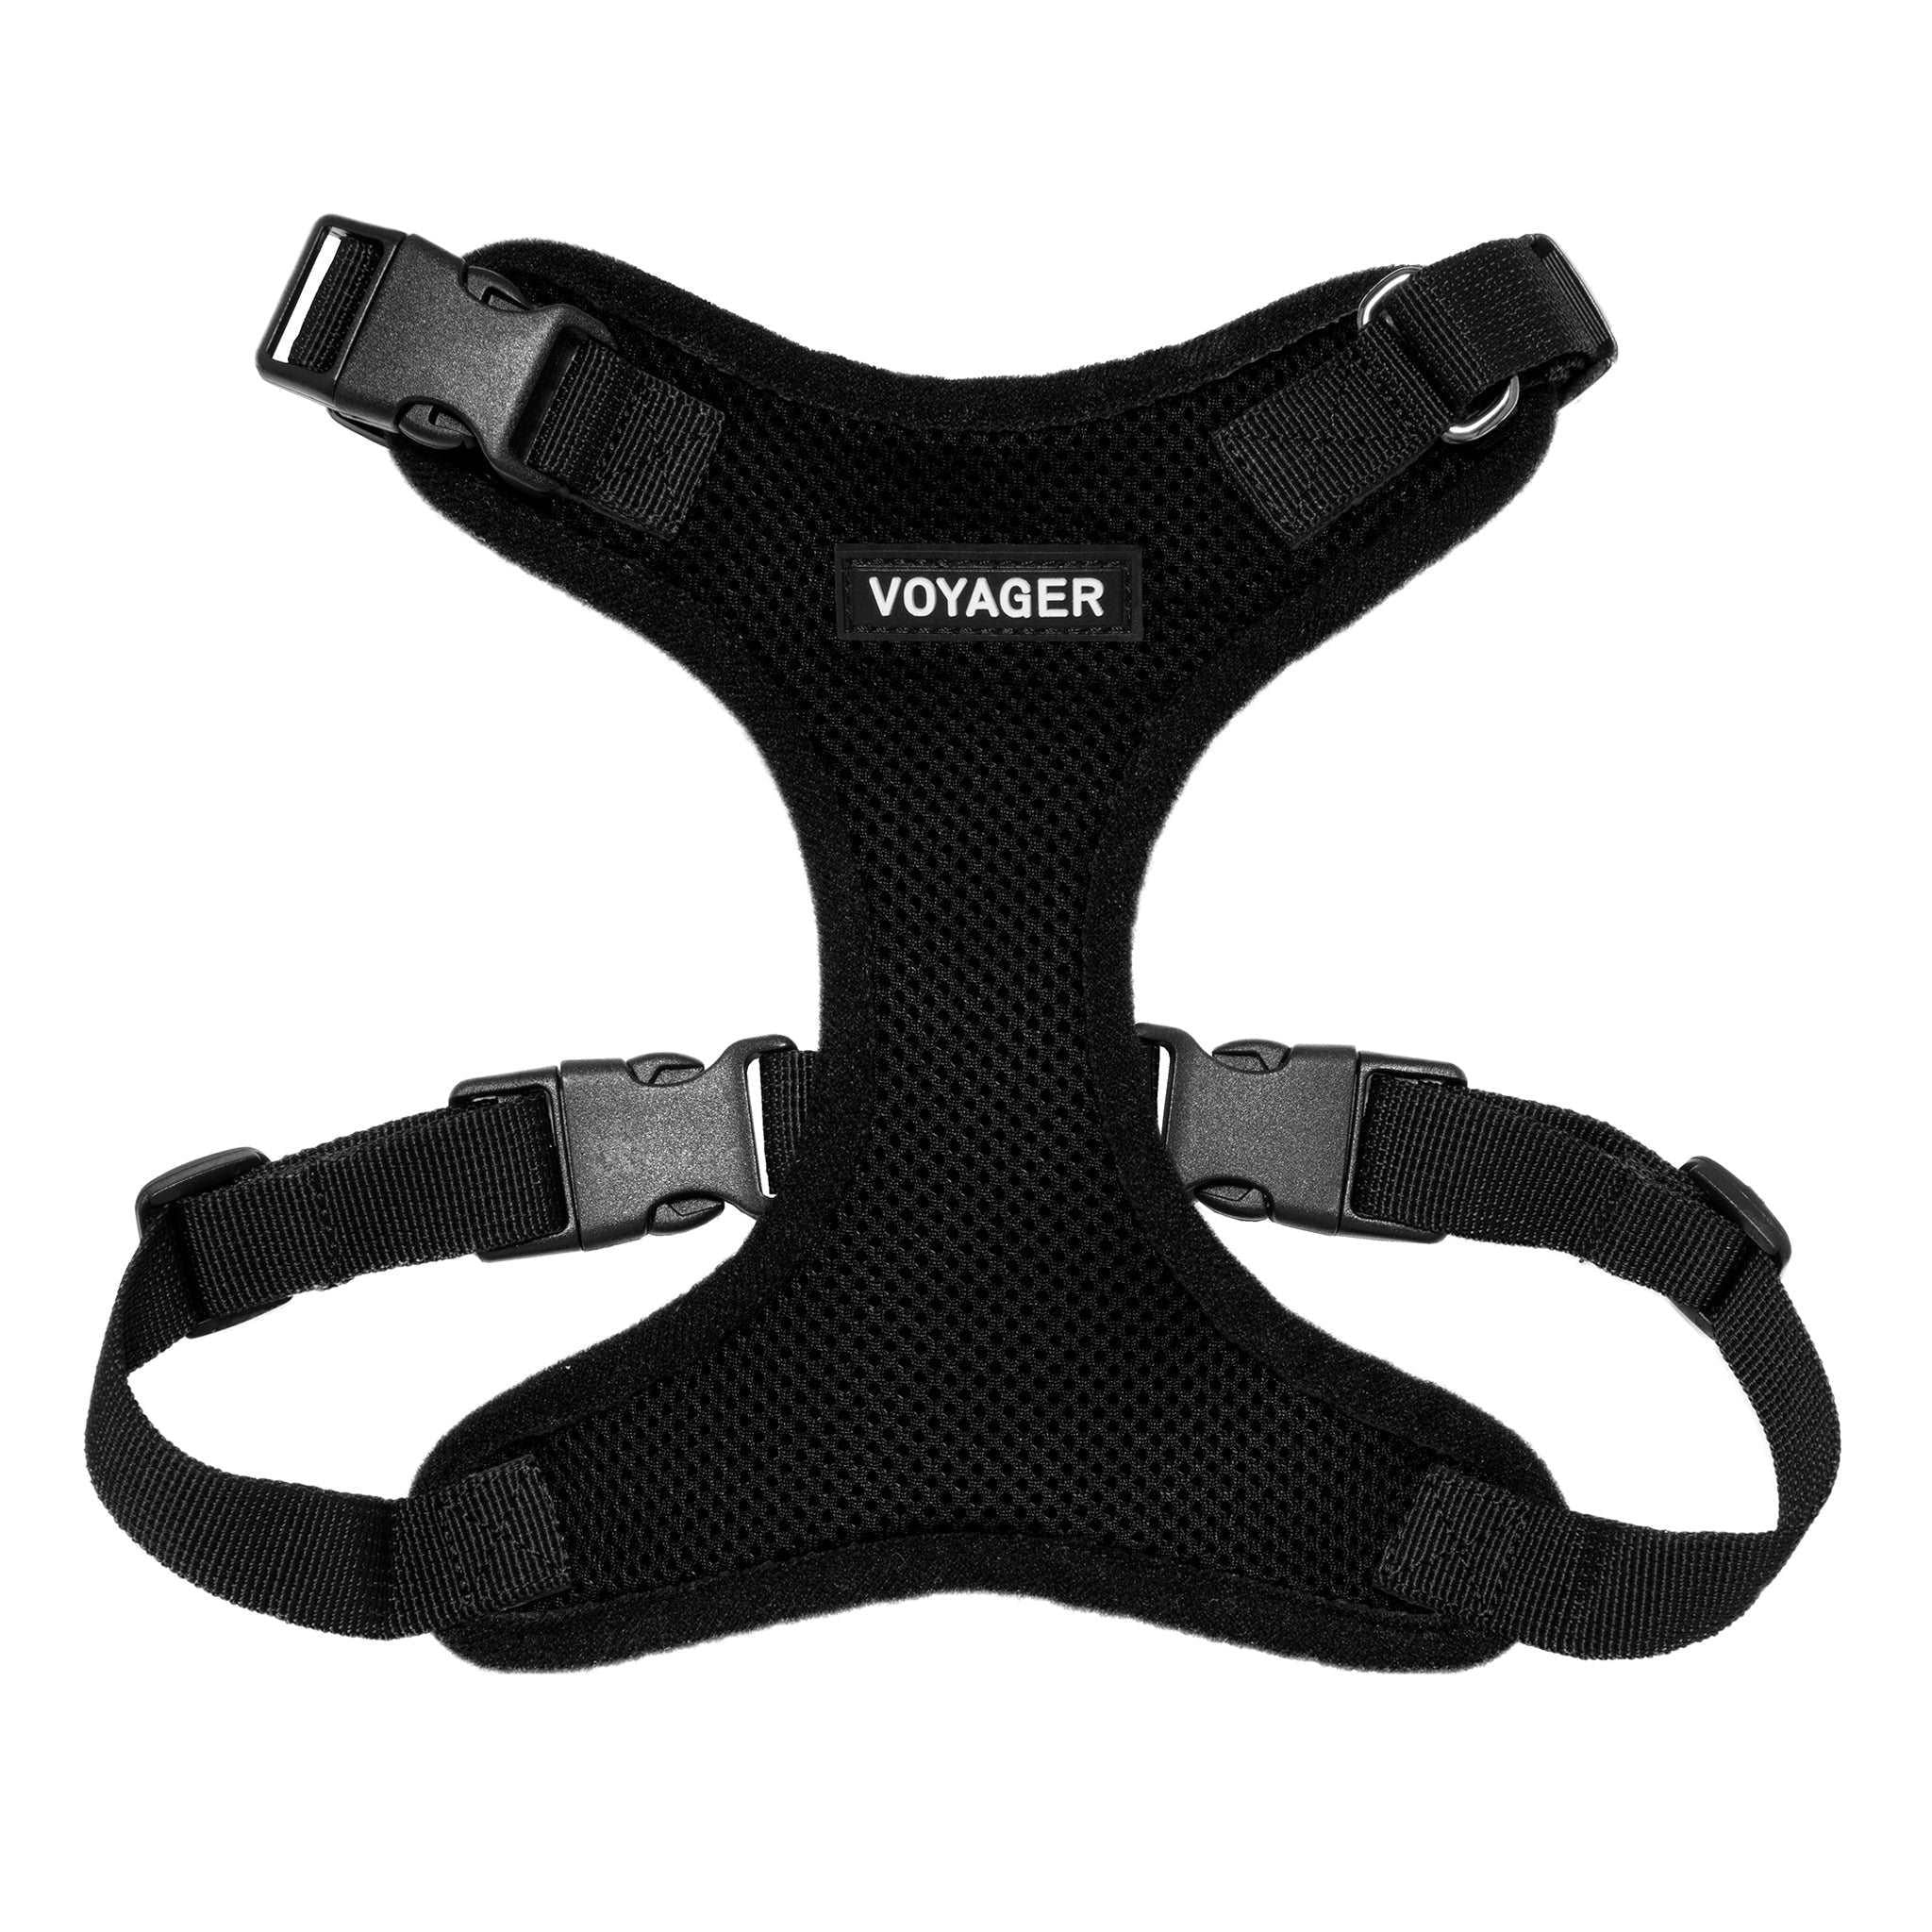 VOYAGER Step-In Lock Dog Harness in Black with Matching Trim and Webbing - Front